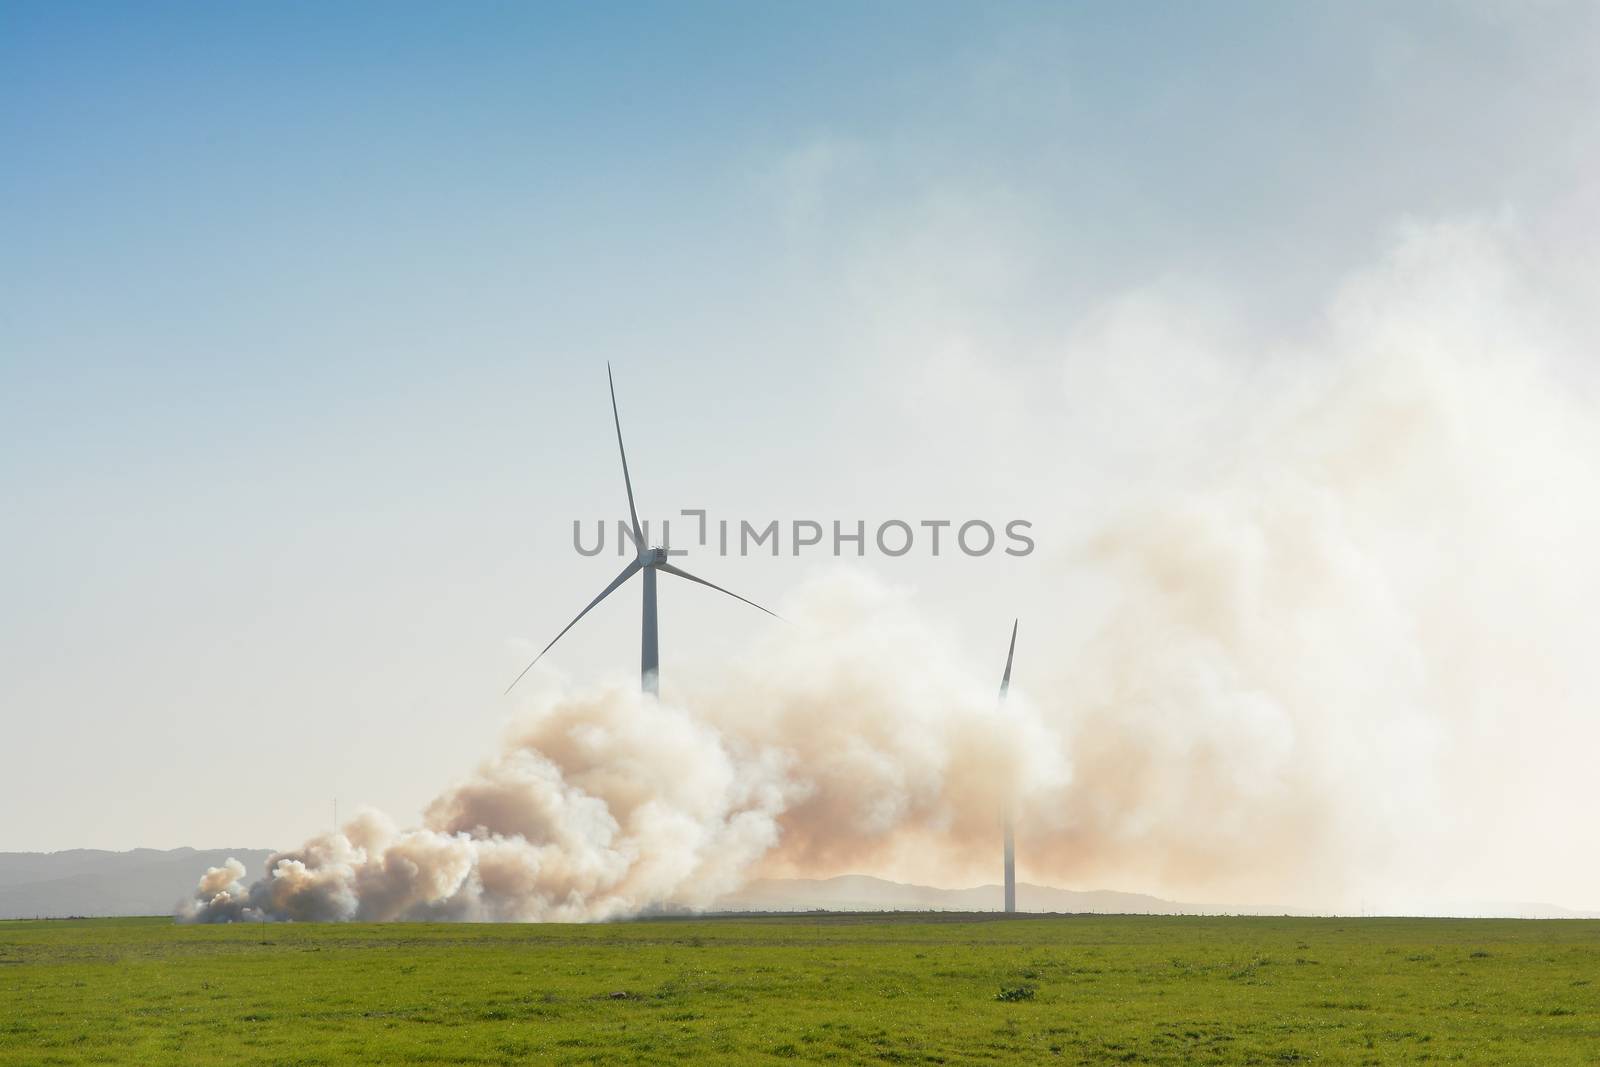 A small wind farm in a green field with a controlled fire burning close by. Thick clouds of smoke conceal most of the nearest turbines.